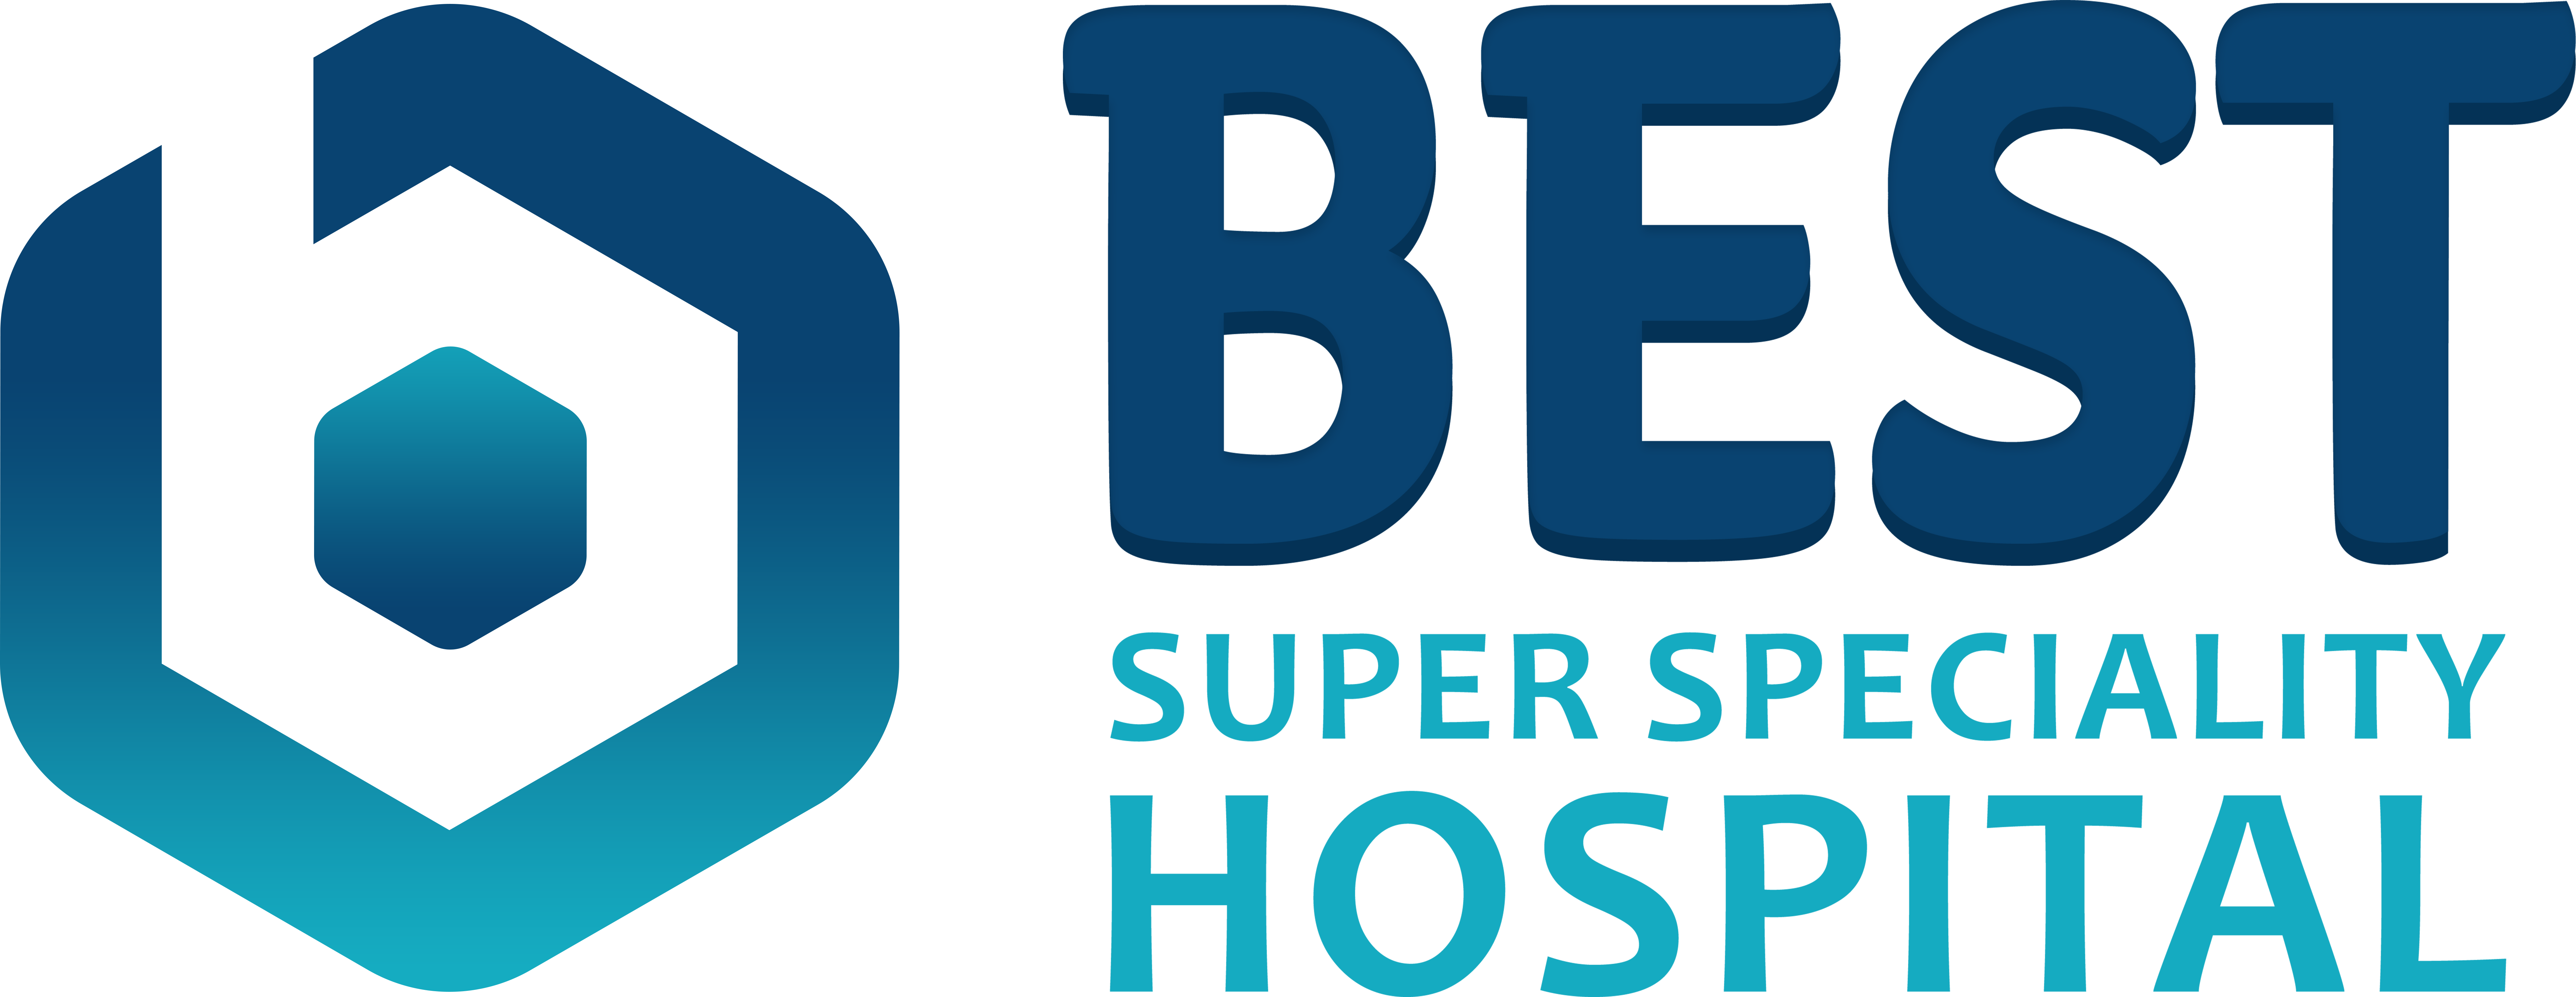 BEST Super Speciality Hospital